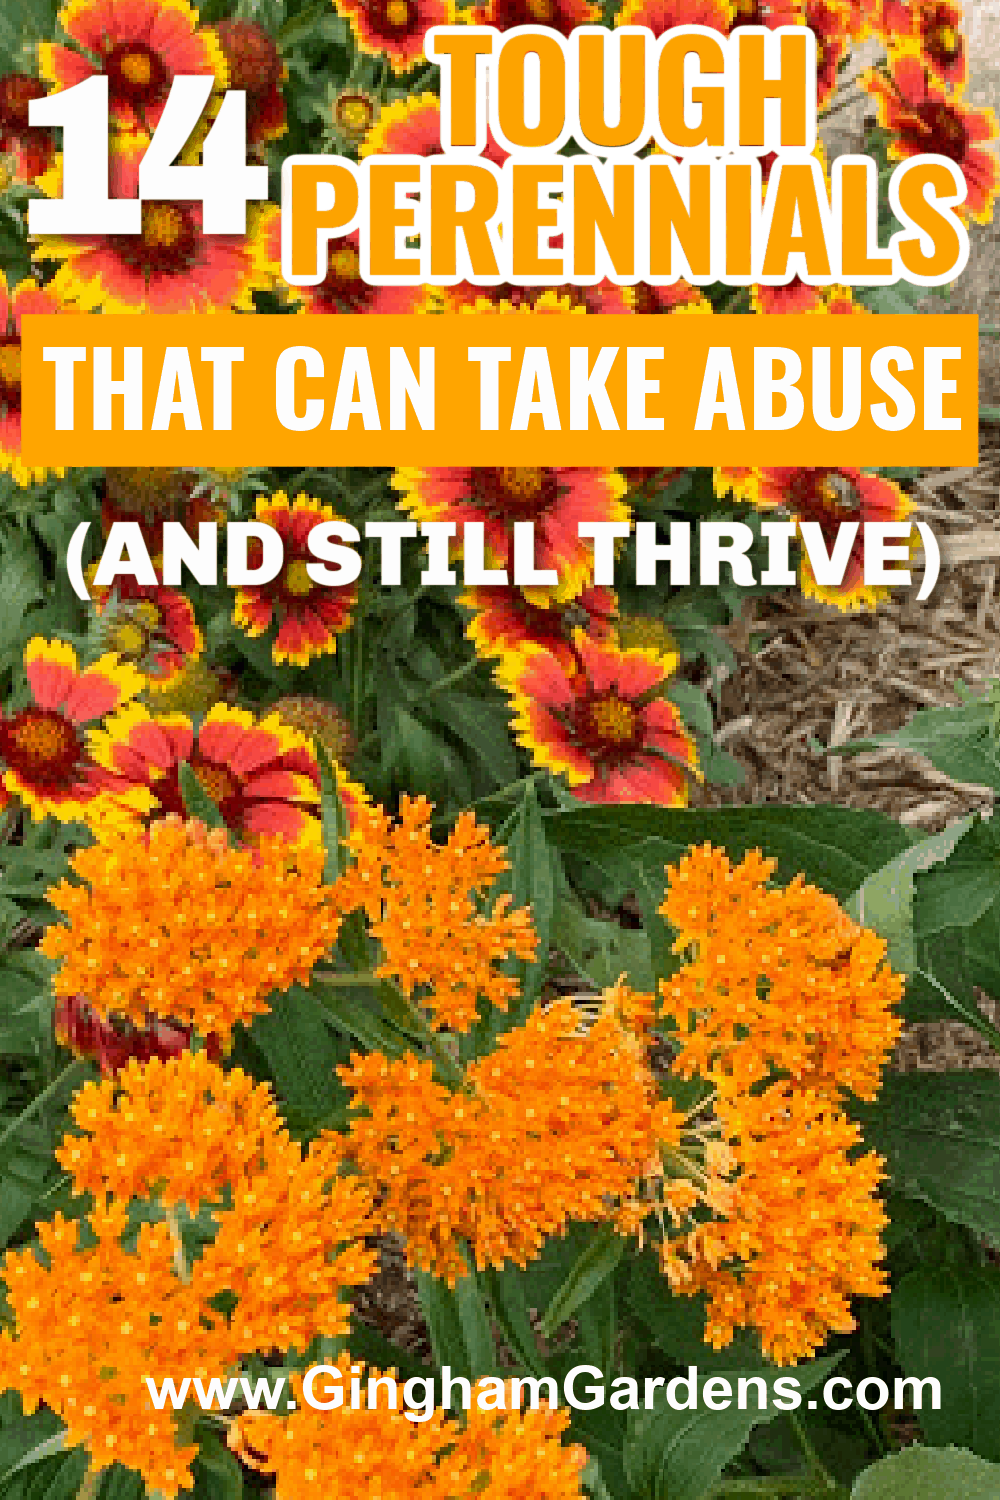 Image of Perennial Flowers with text overlay - 14 Tough Perennials that can take abuse and still thrive